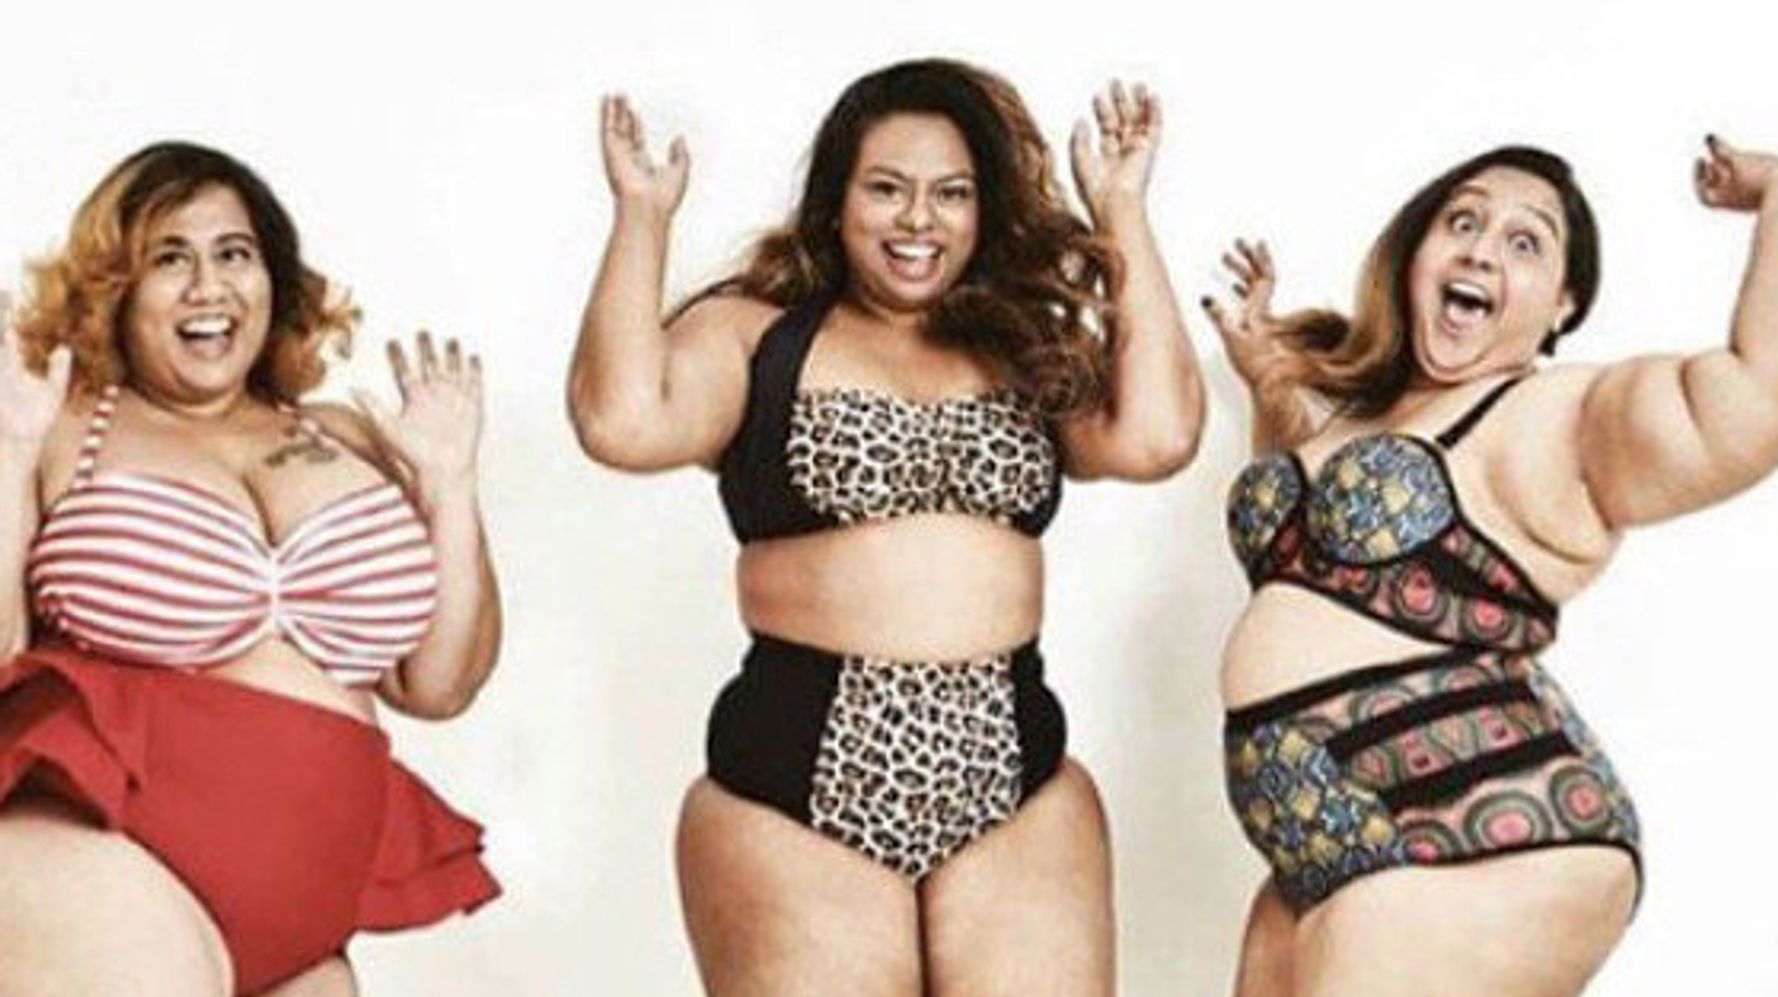 Fat Nude Beach Tumblr - Did We Violate Instagram Guidelines By Being 'Too Fat' To Wear A Swimsuit?  | HuffPost News